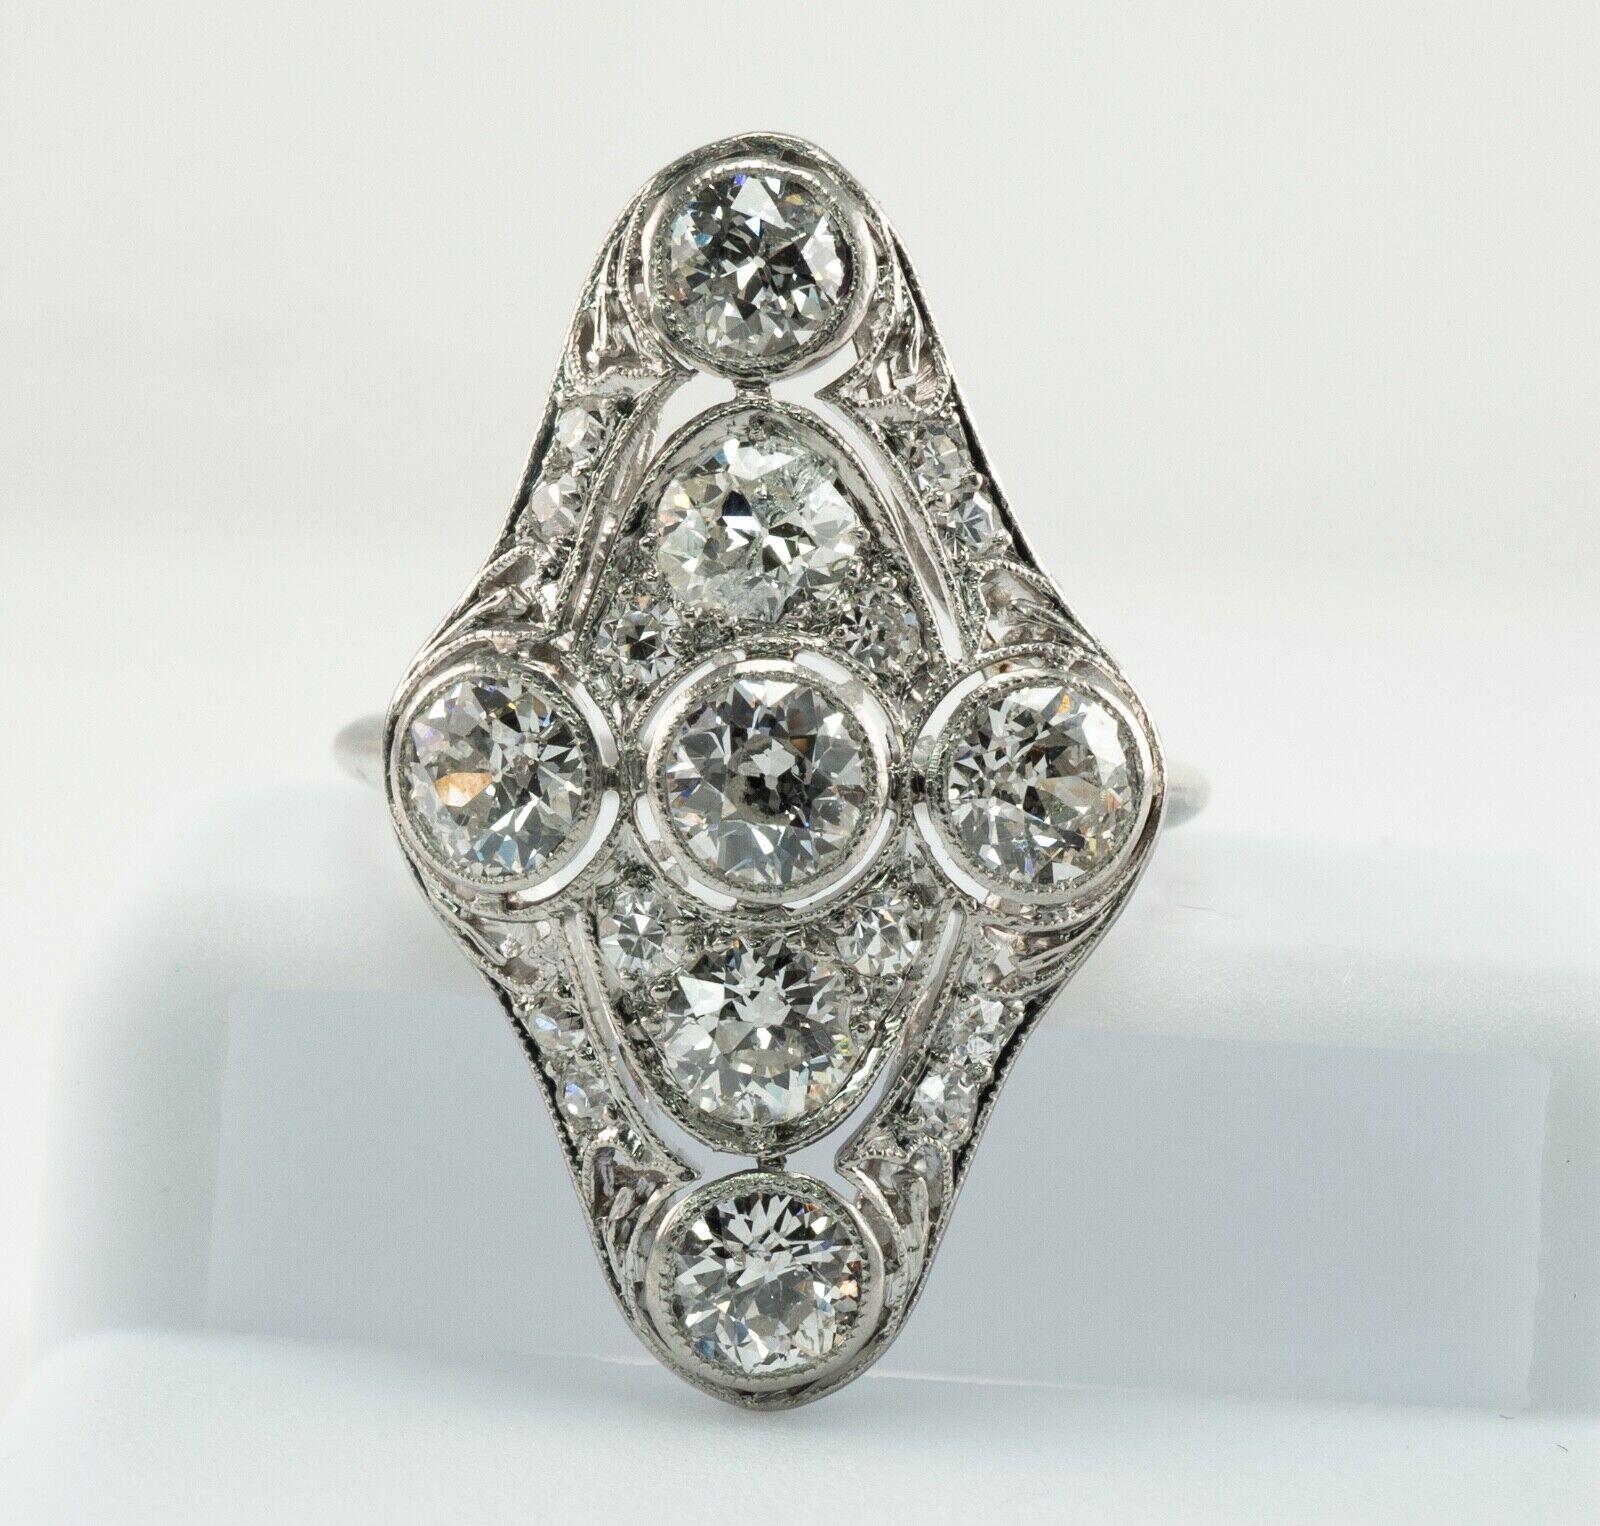 Edwardian Old Mine Diamond Ring 2.06 cttw Platinum

This gorgeous antique from Edwardian era ring is finely crafted in solid Platinum.
The ring is carefully tested and guaranteed. 
The ring is set with 19 natural old mine diamonds totaling 2.06